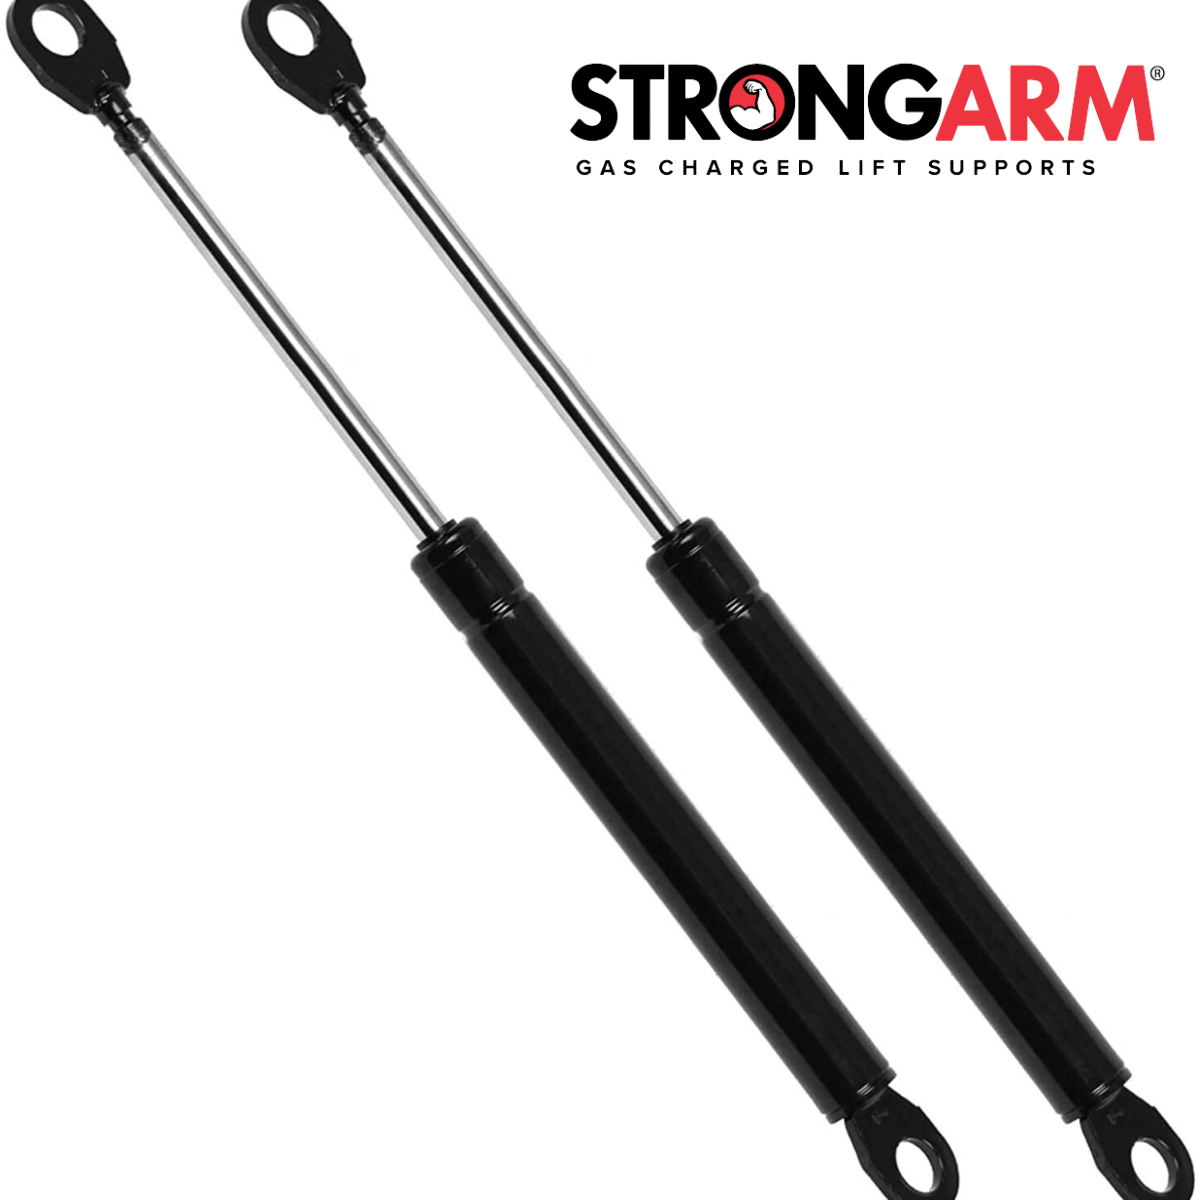 Universal Lift Support From StrongArm